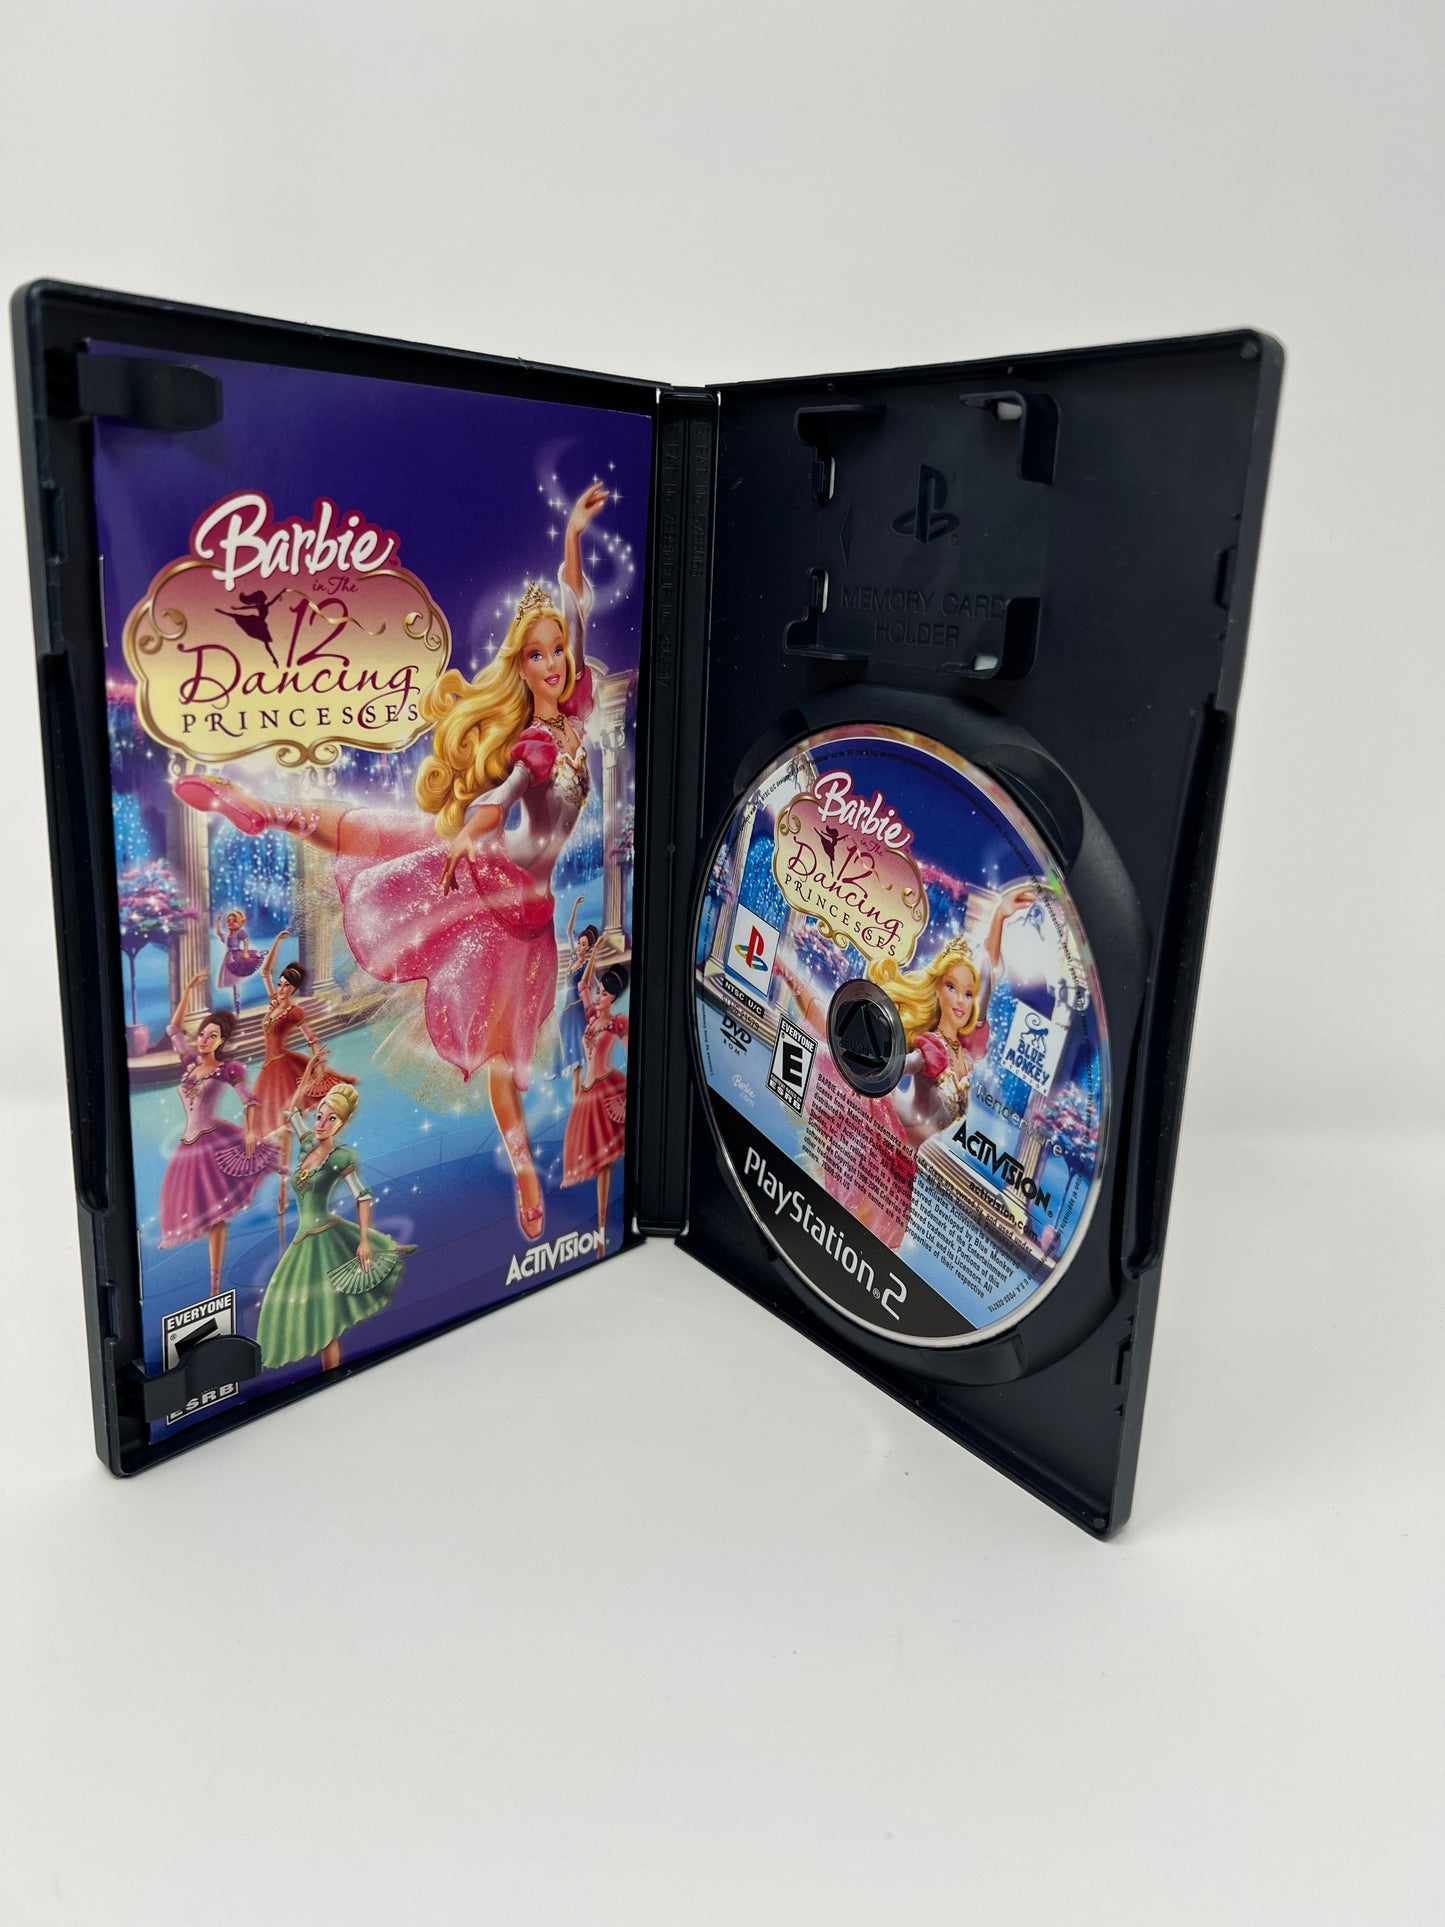 Barbie in the 12 Dancing Princesses - PS2 game - Used